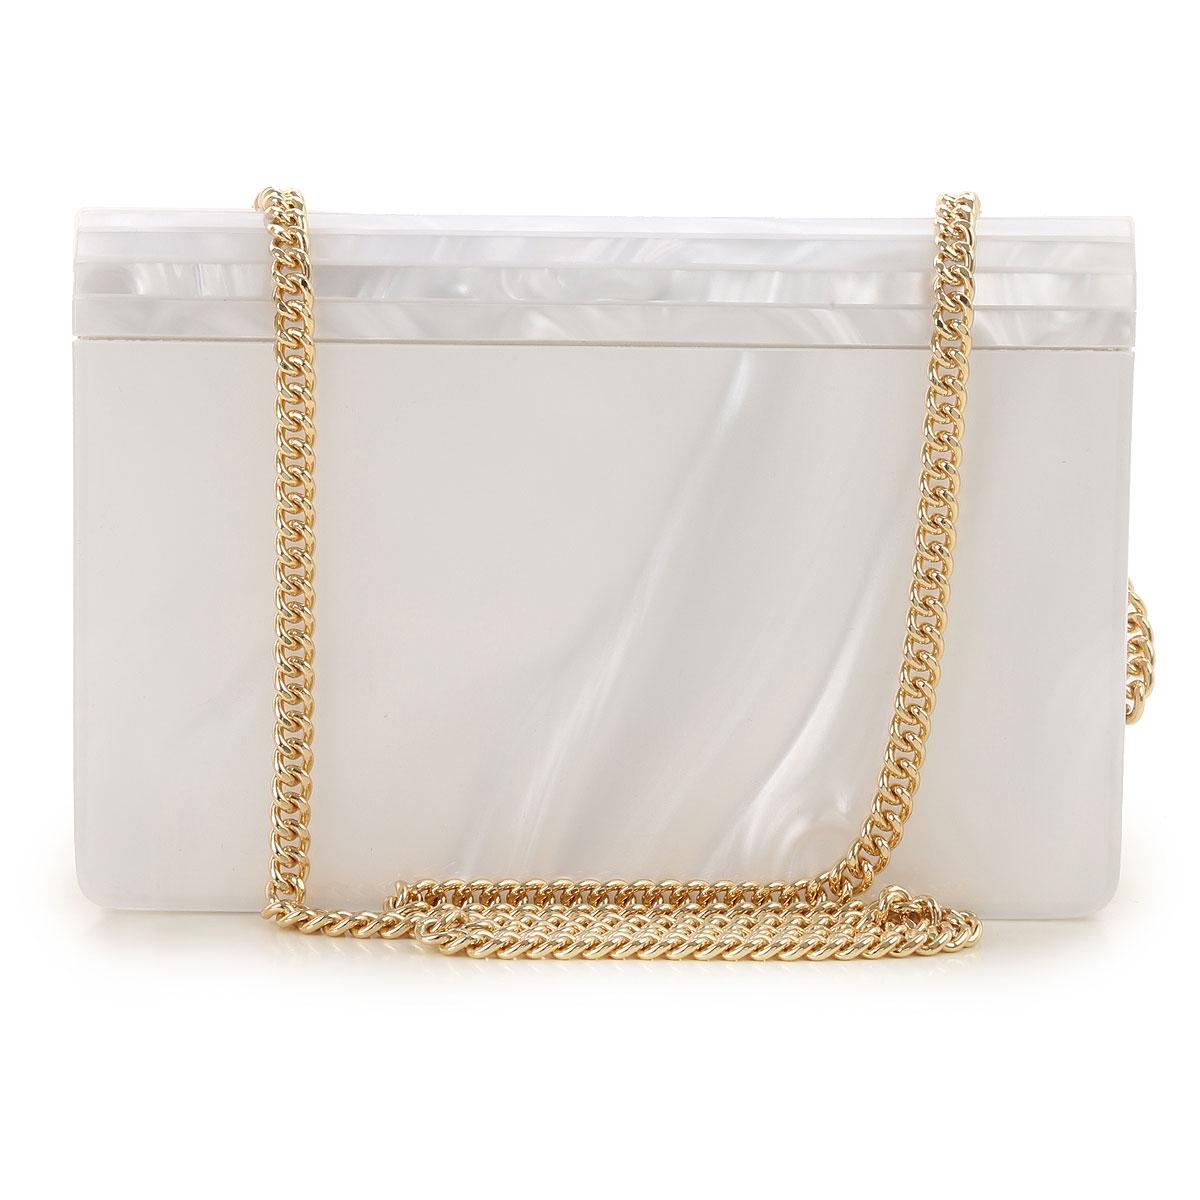 Michael Kors Leather Clutch Bag On Sale in White - Lyst